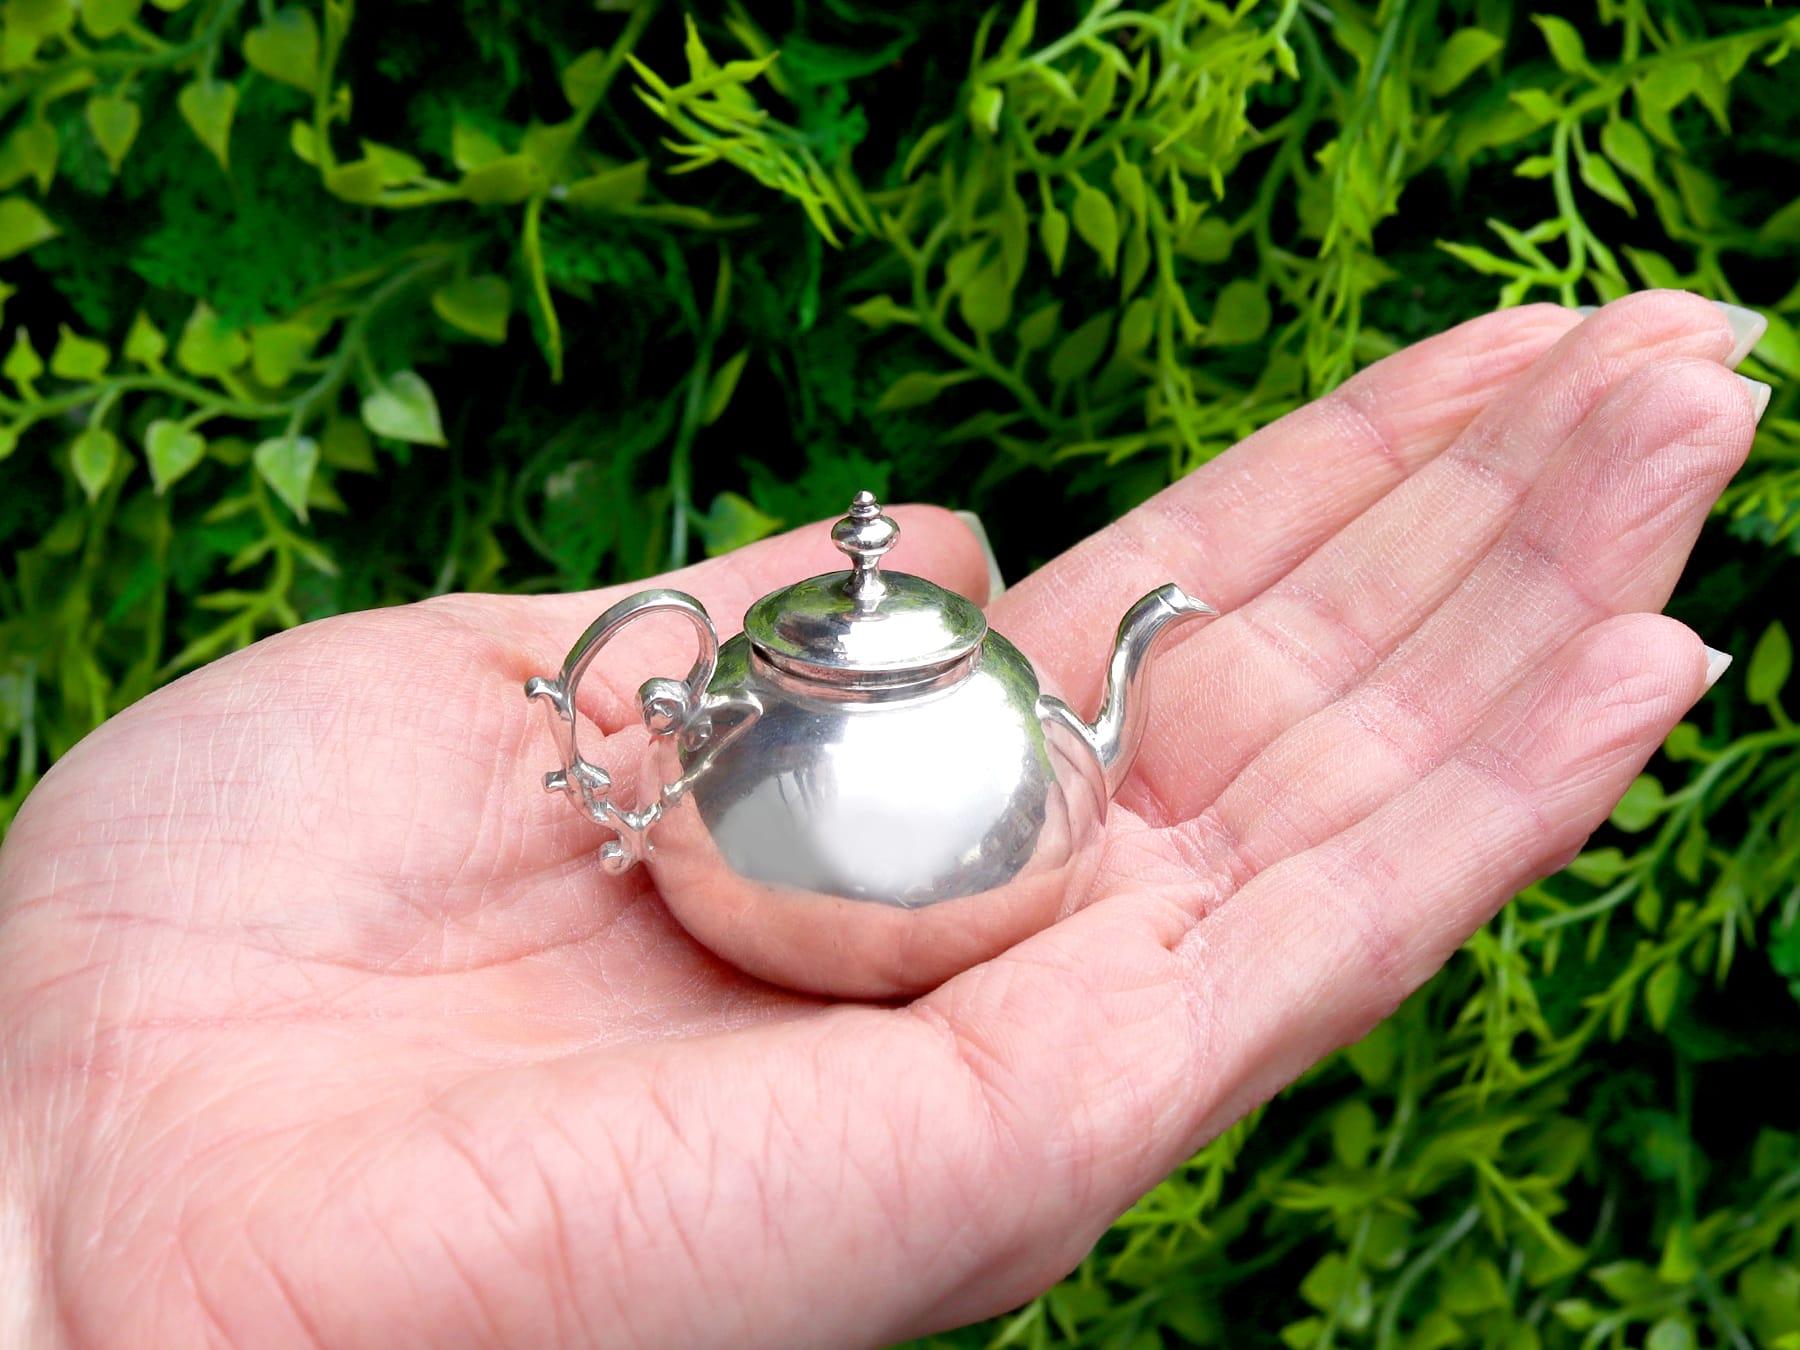 An exceptional, fine and impressive, antique 18th century Dutch silver miniature teapot; an addition to our silver teaware collection

This exceptional, fine and impressive antique 18th century Dutch silver miniature teapot has a circular rounded